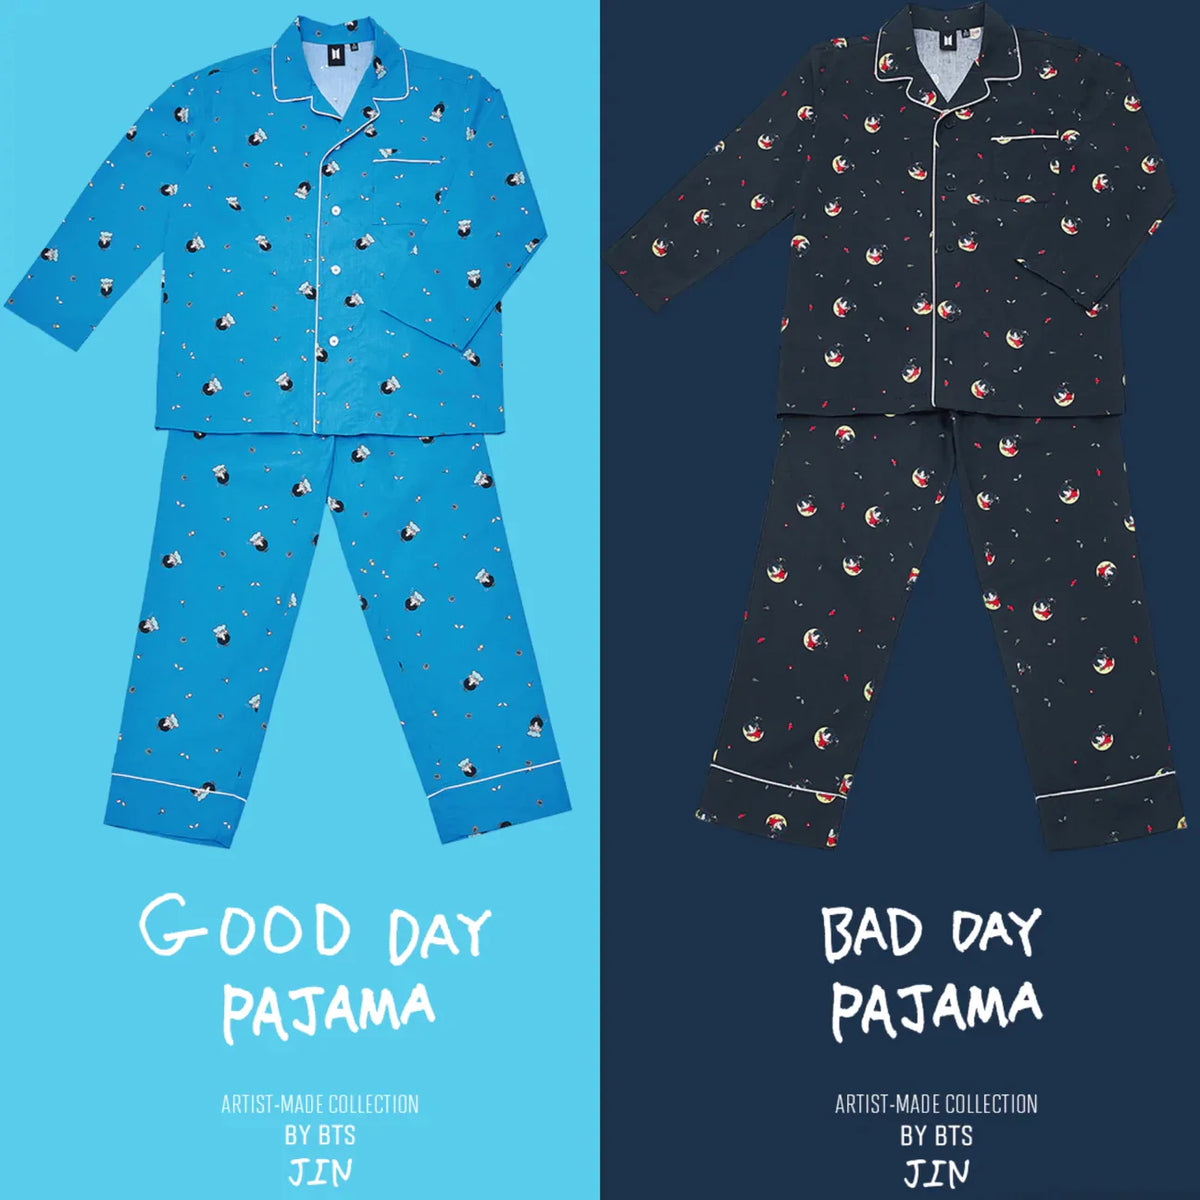 ARTIST MADE COLLECTION - JIN GOOD DAY / BAD DAY PAJAMA 